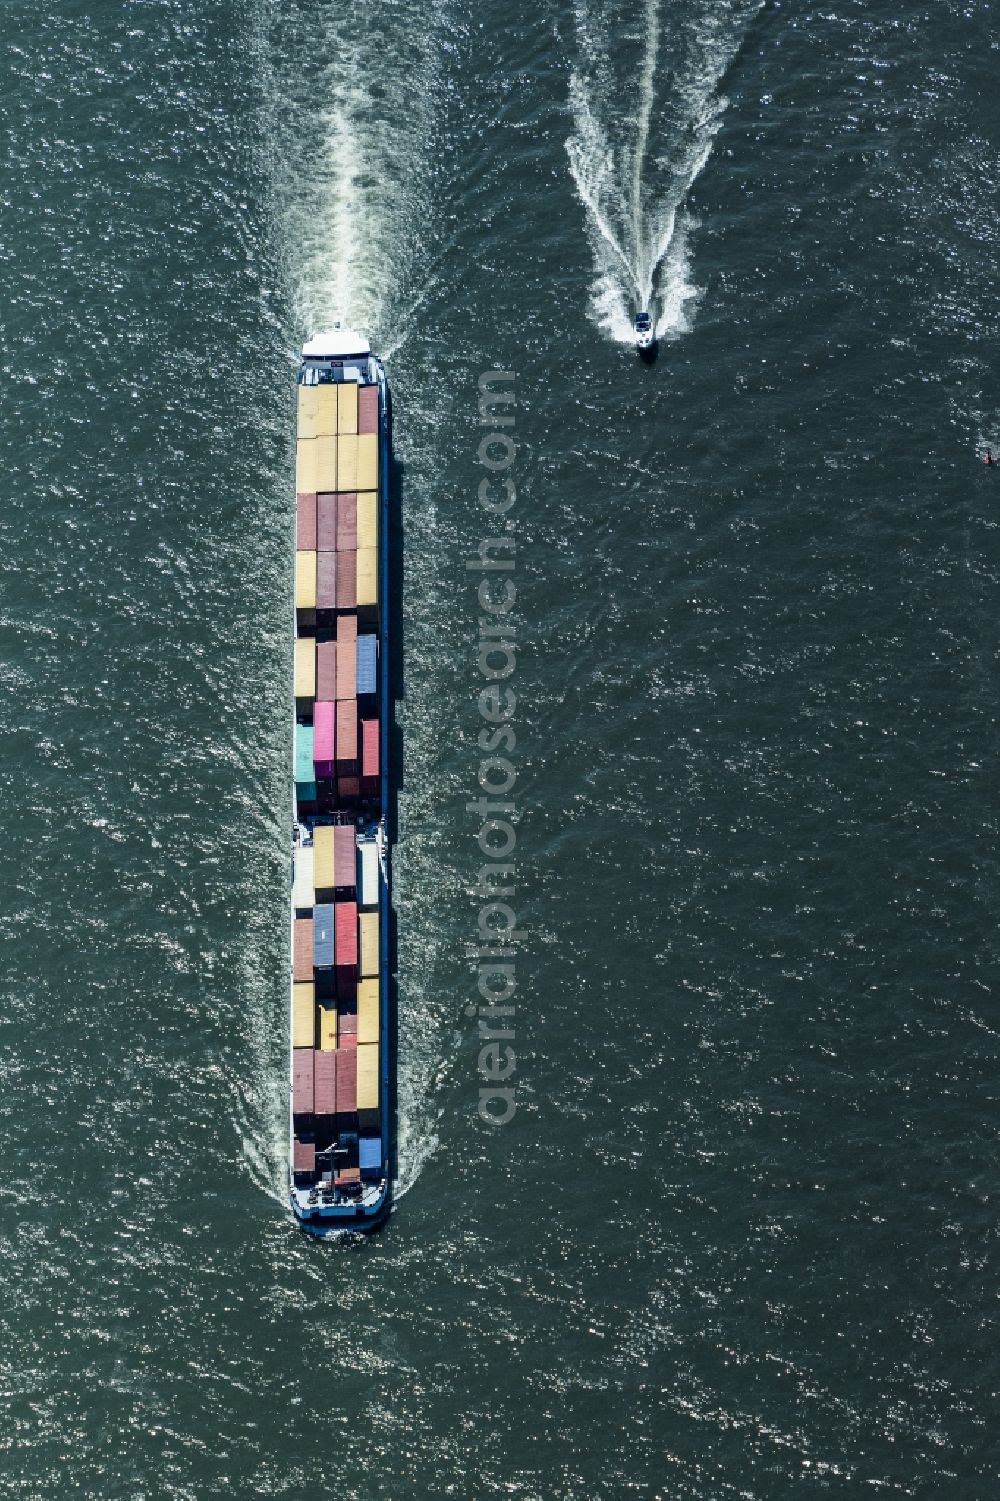 Oestrich-Winkel from above - Sailing container ship on Rhein in Oestrich-Winkel in the state Hesse, Germany